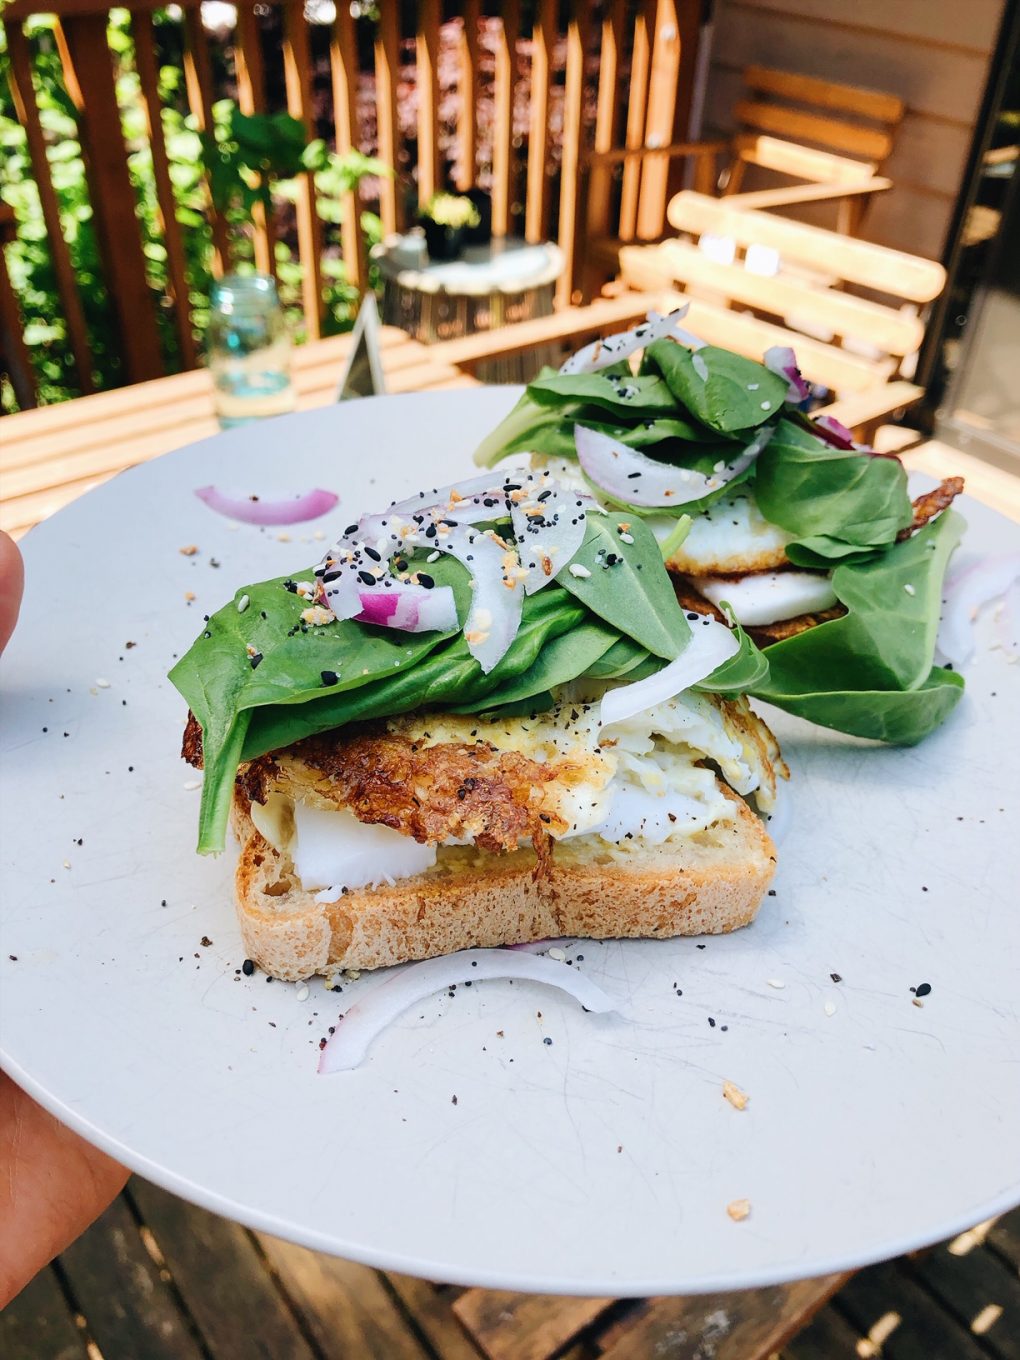 Side view of a plate on an outdoor wooden table with two open faced fried egg sandwiches with baby spinach, red onion, and everything bagel spice